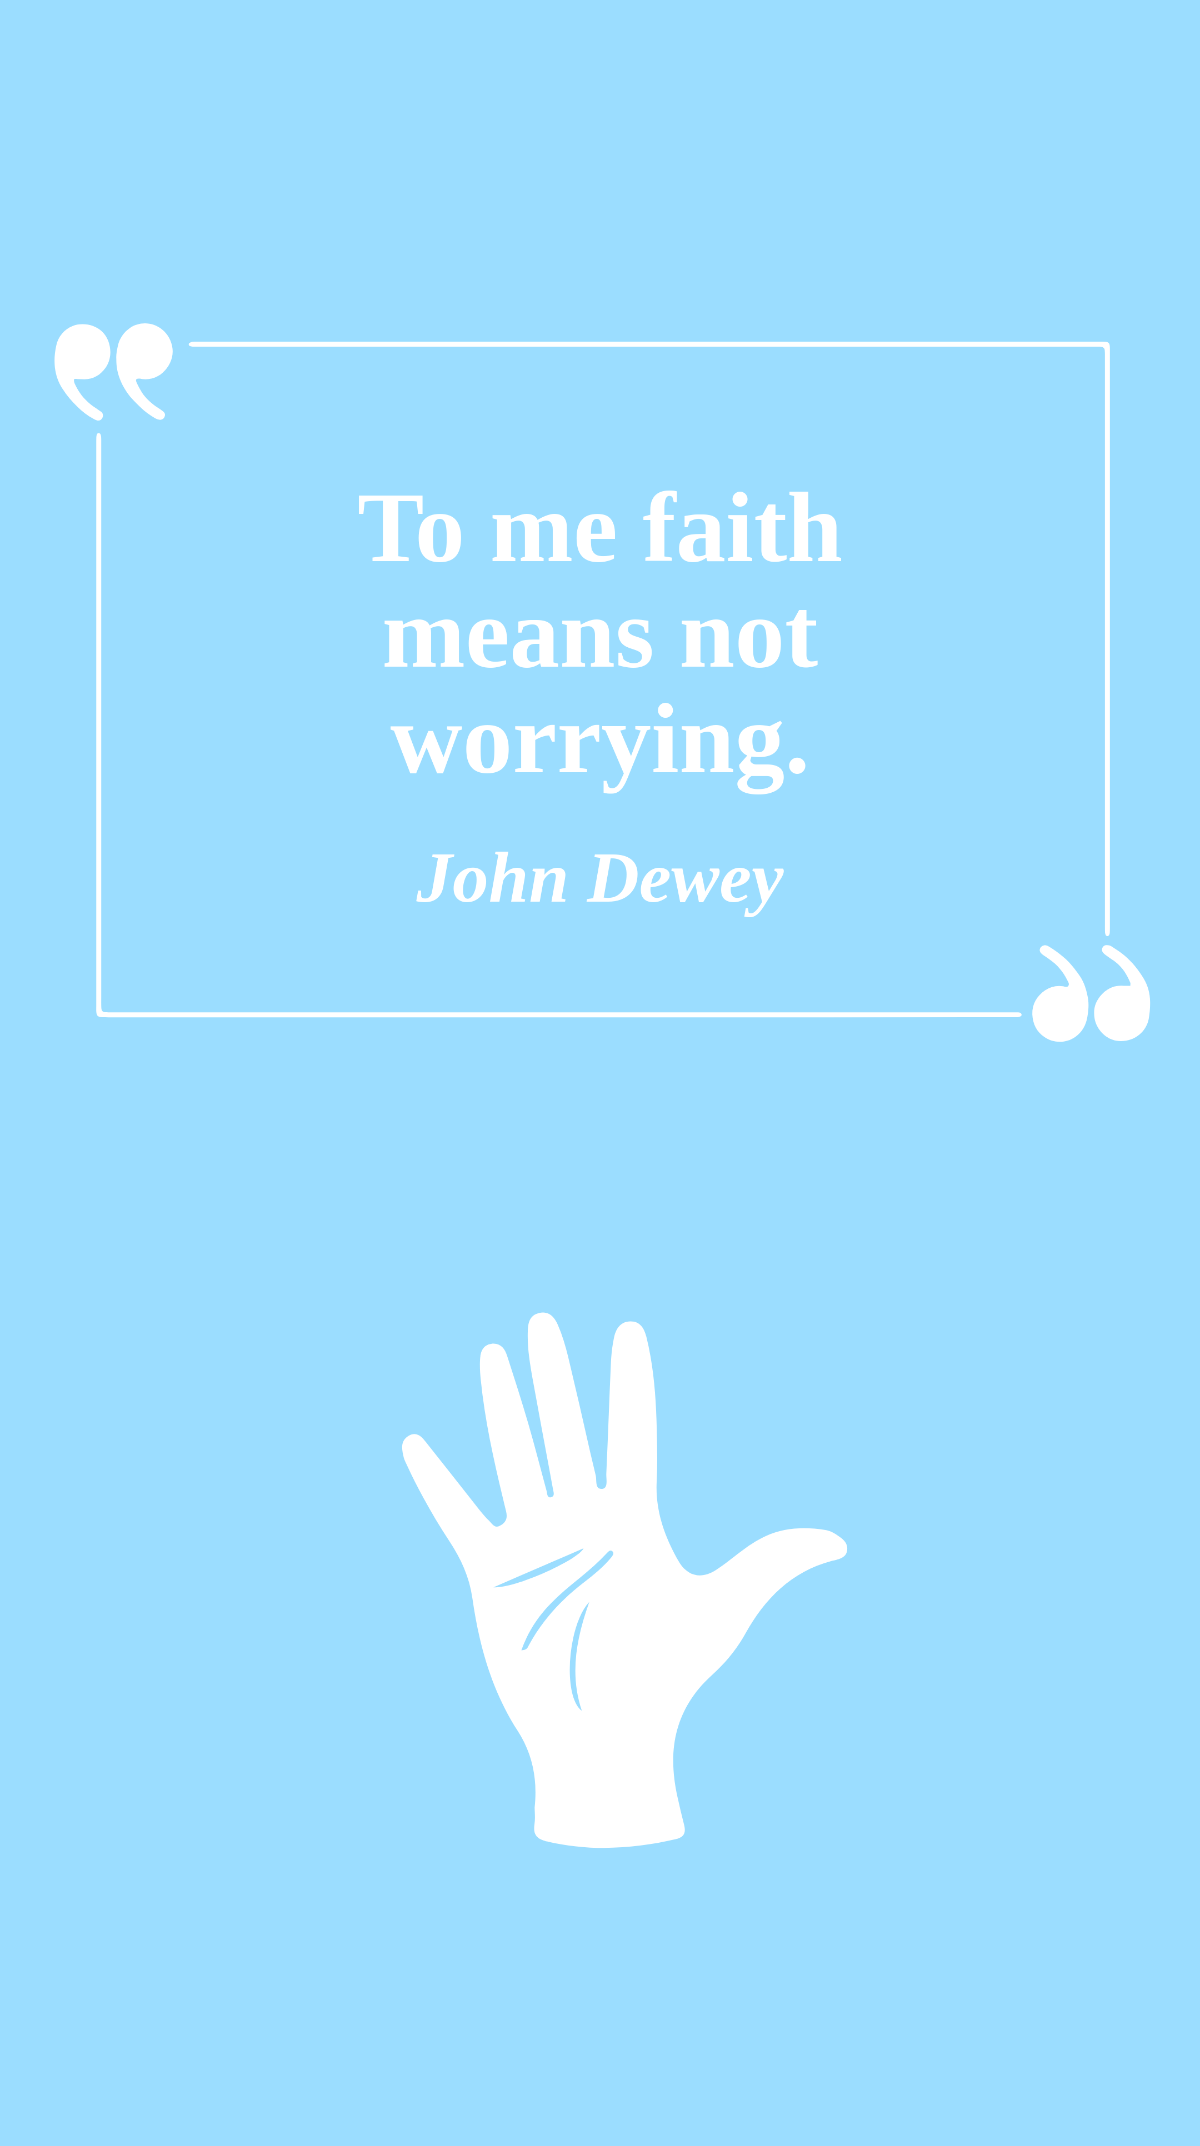 Free John Dewey - To me faith means not worrying. Template